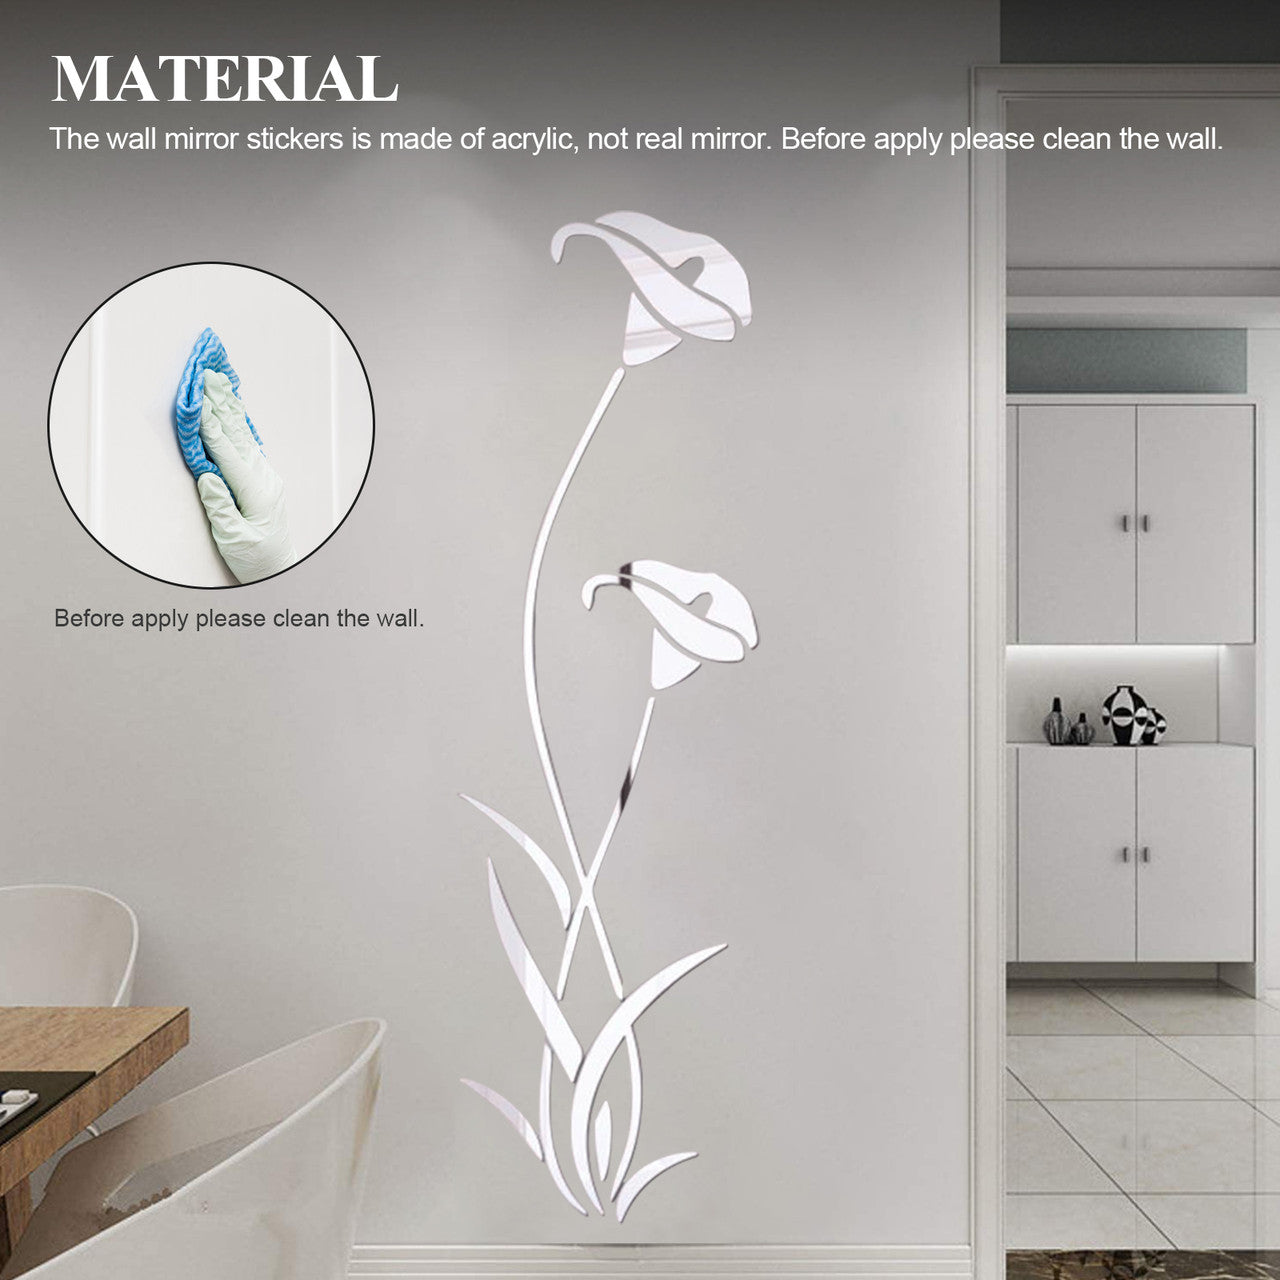 Removable Art DIY 3D Wall Stickers, Acrylic Decal Mural Home decor